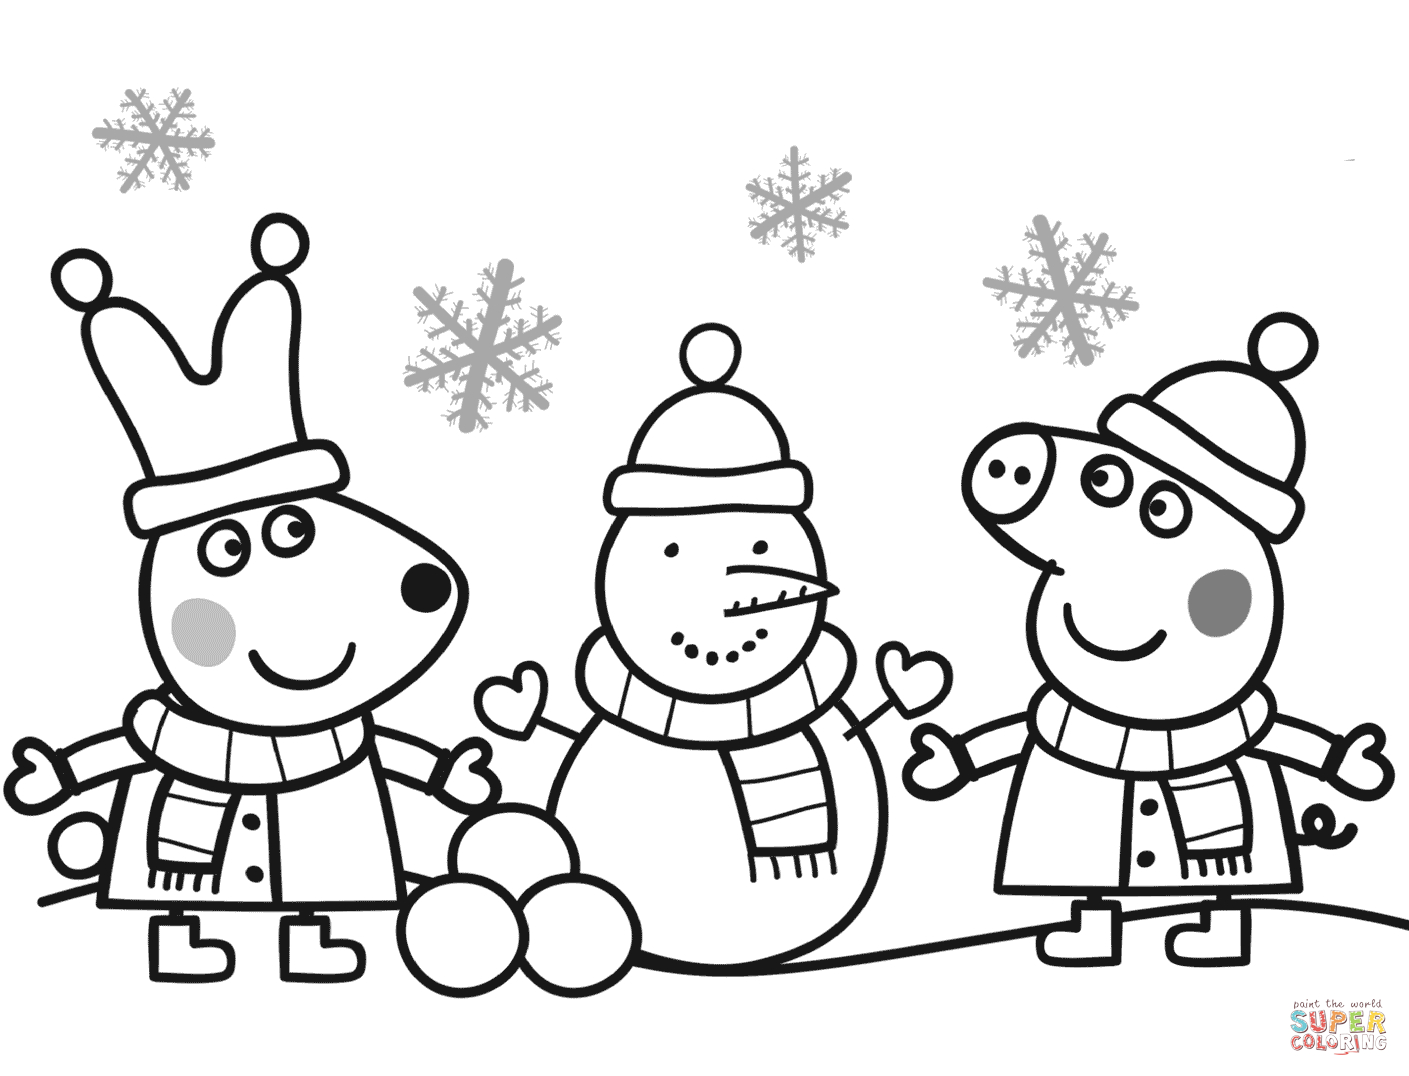 Coloring Pages Online To Print Peppa Pig Coloring Pdf Pages Online Colouring Sheet Free Printable